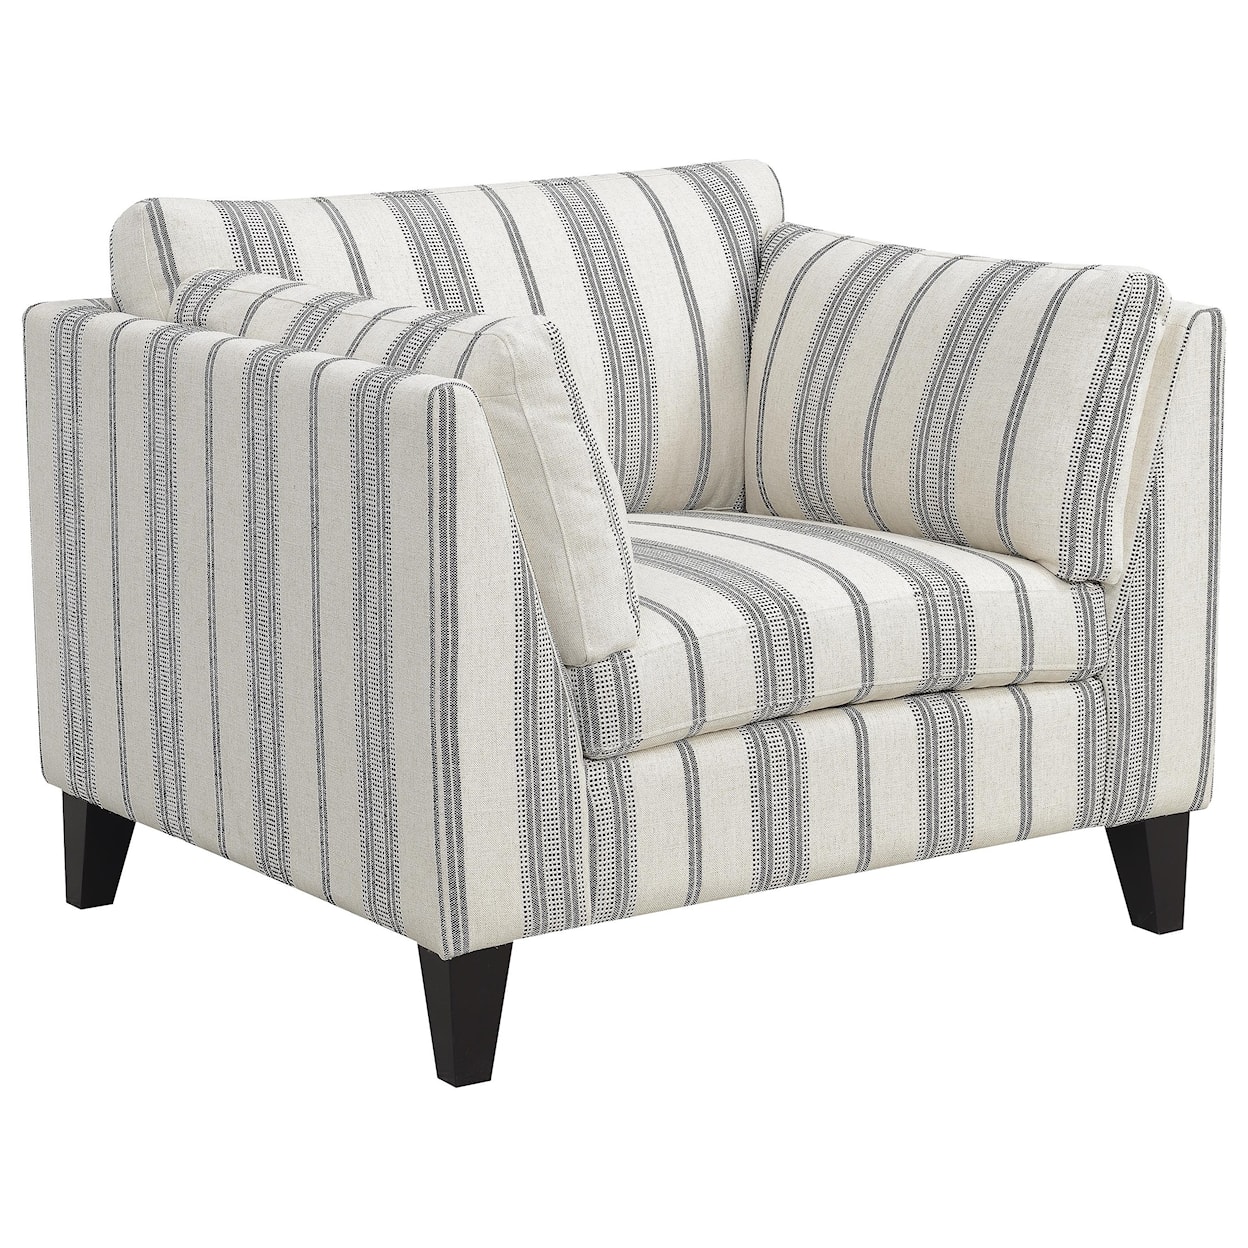 Emerald 20870 Contemporary Upholstered Chair